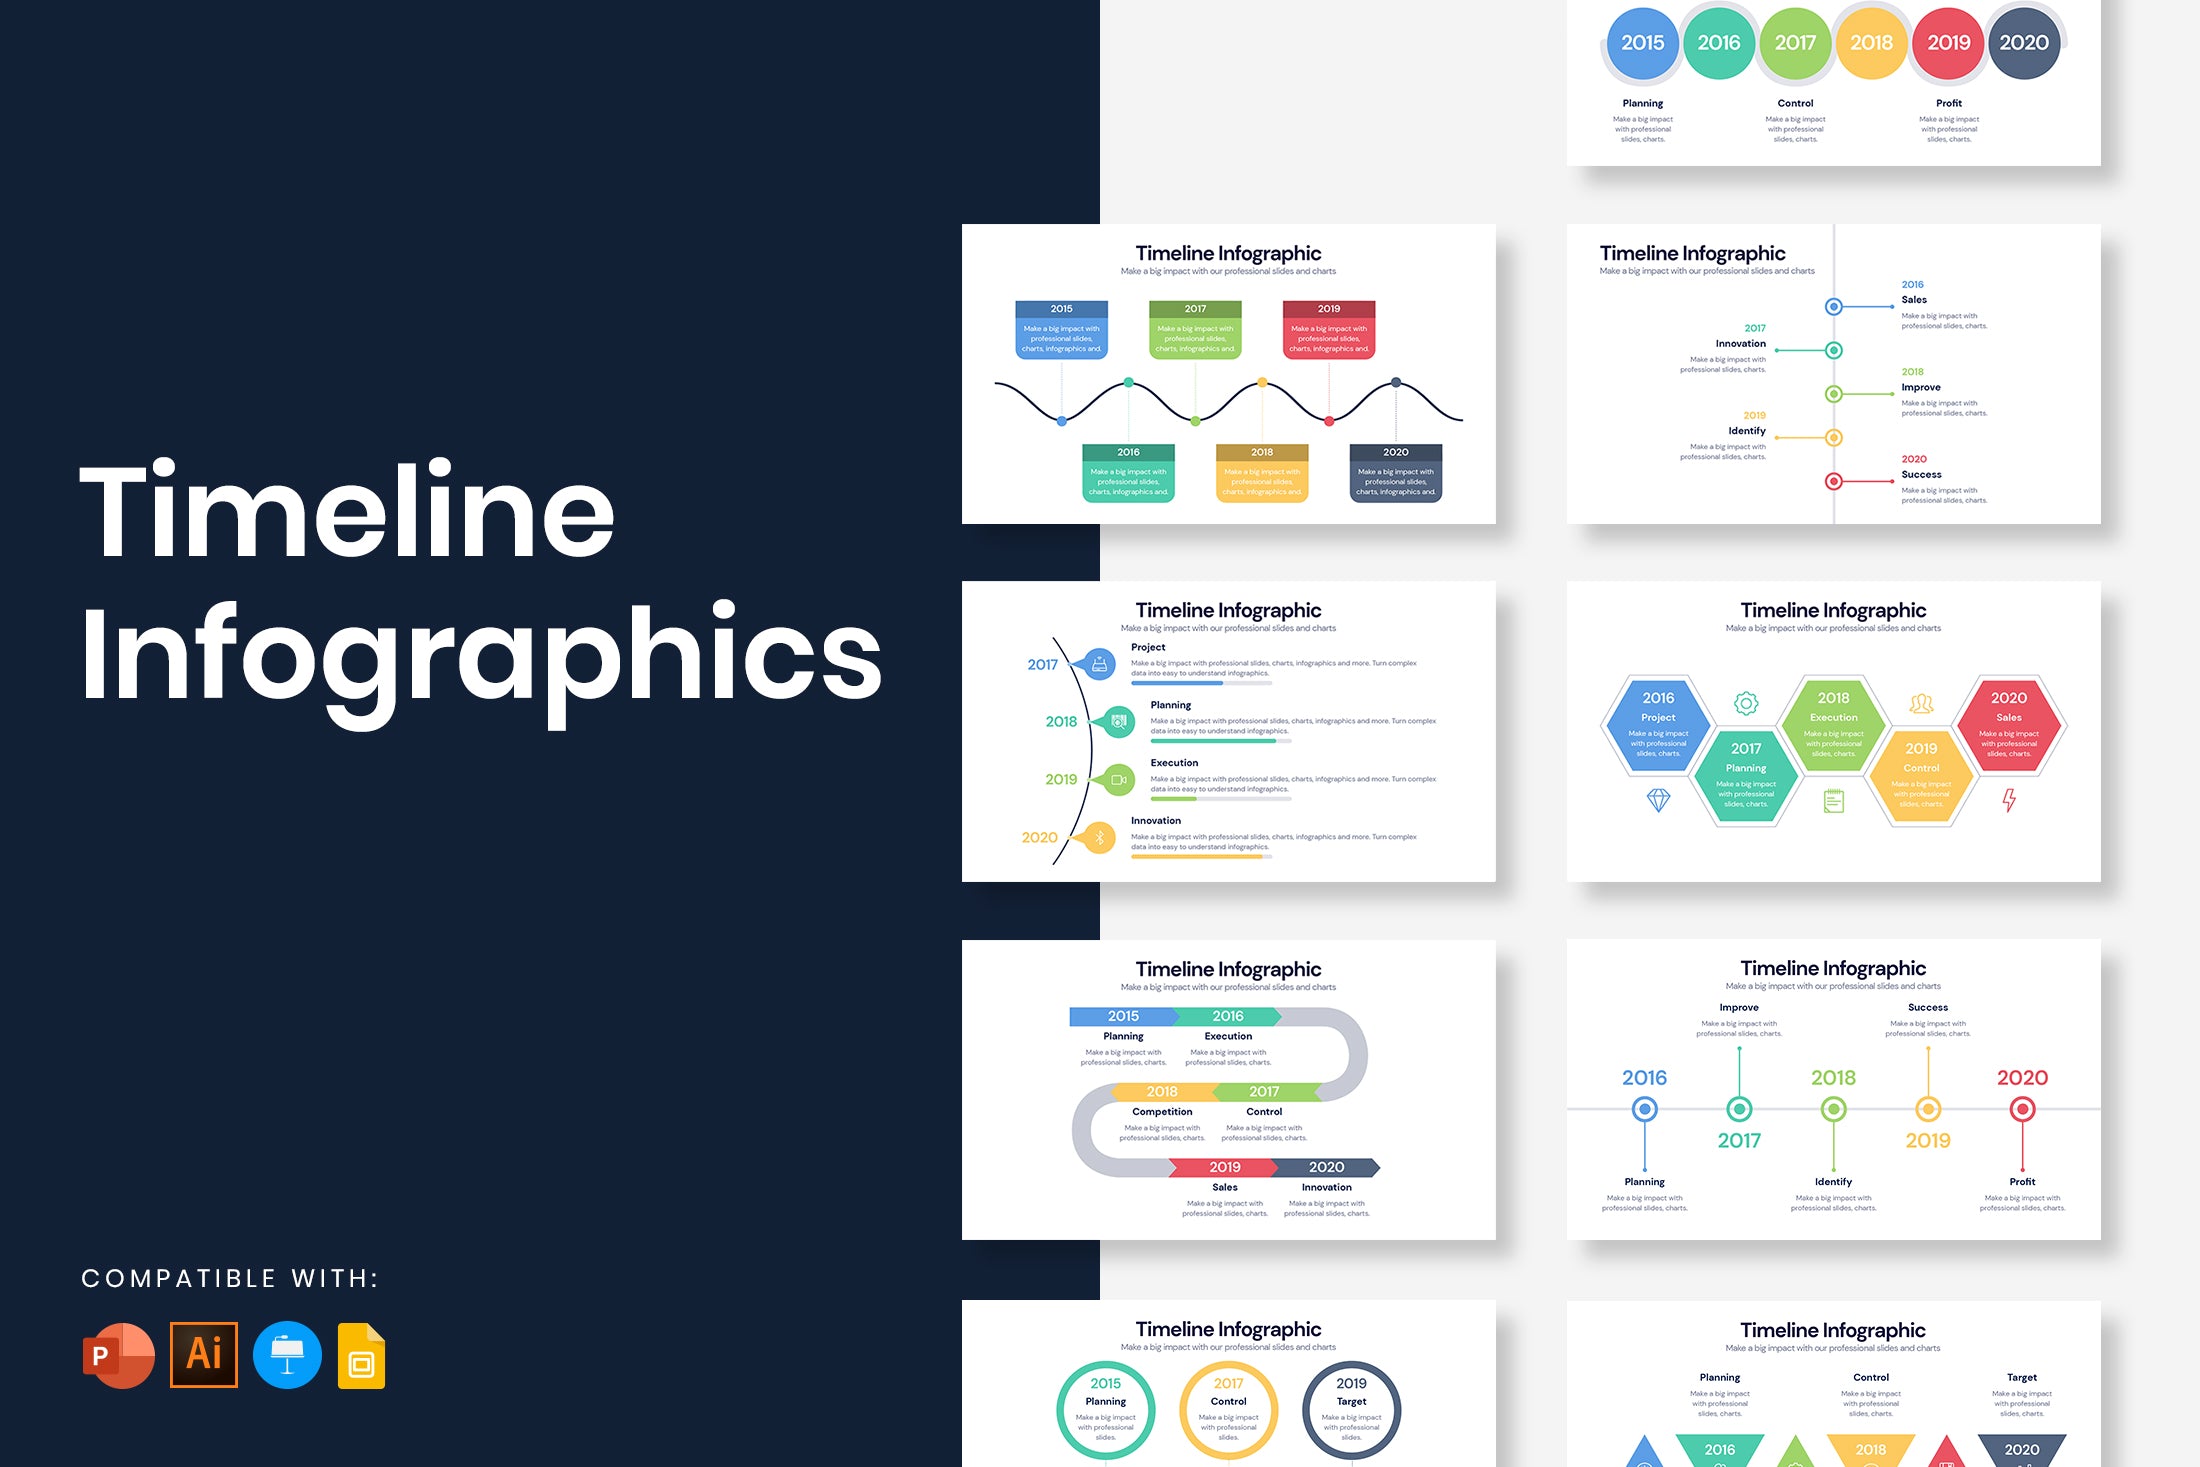 infographic timeline text